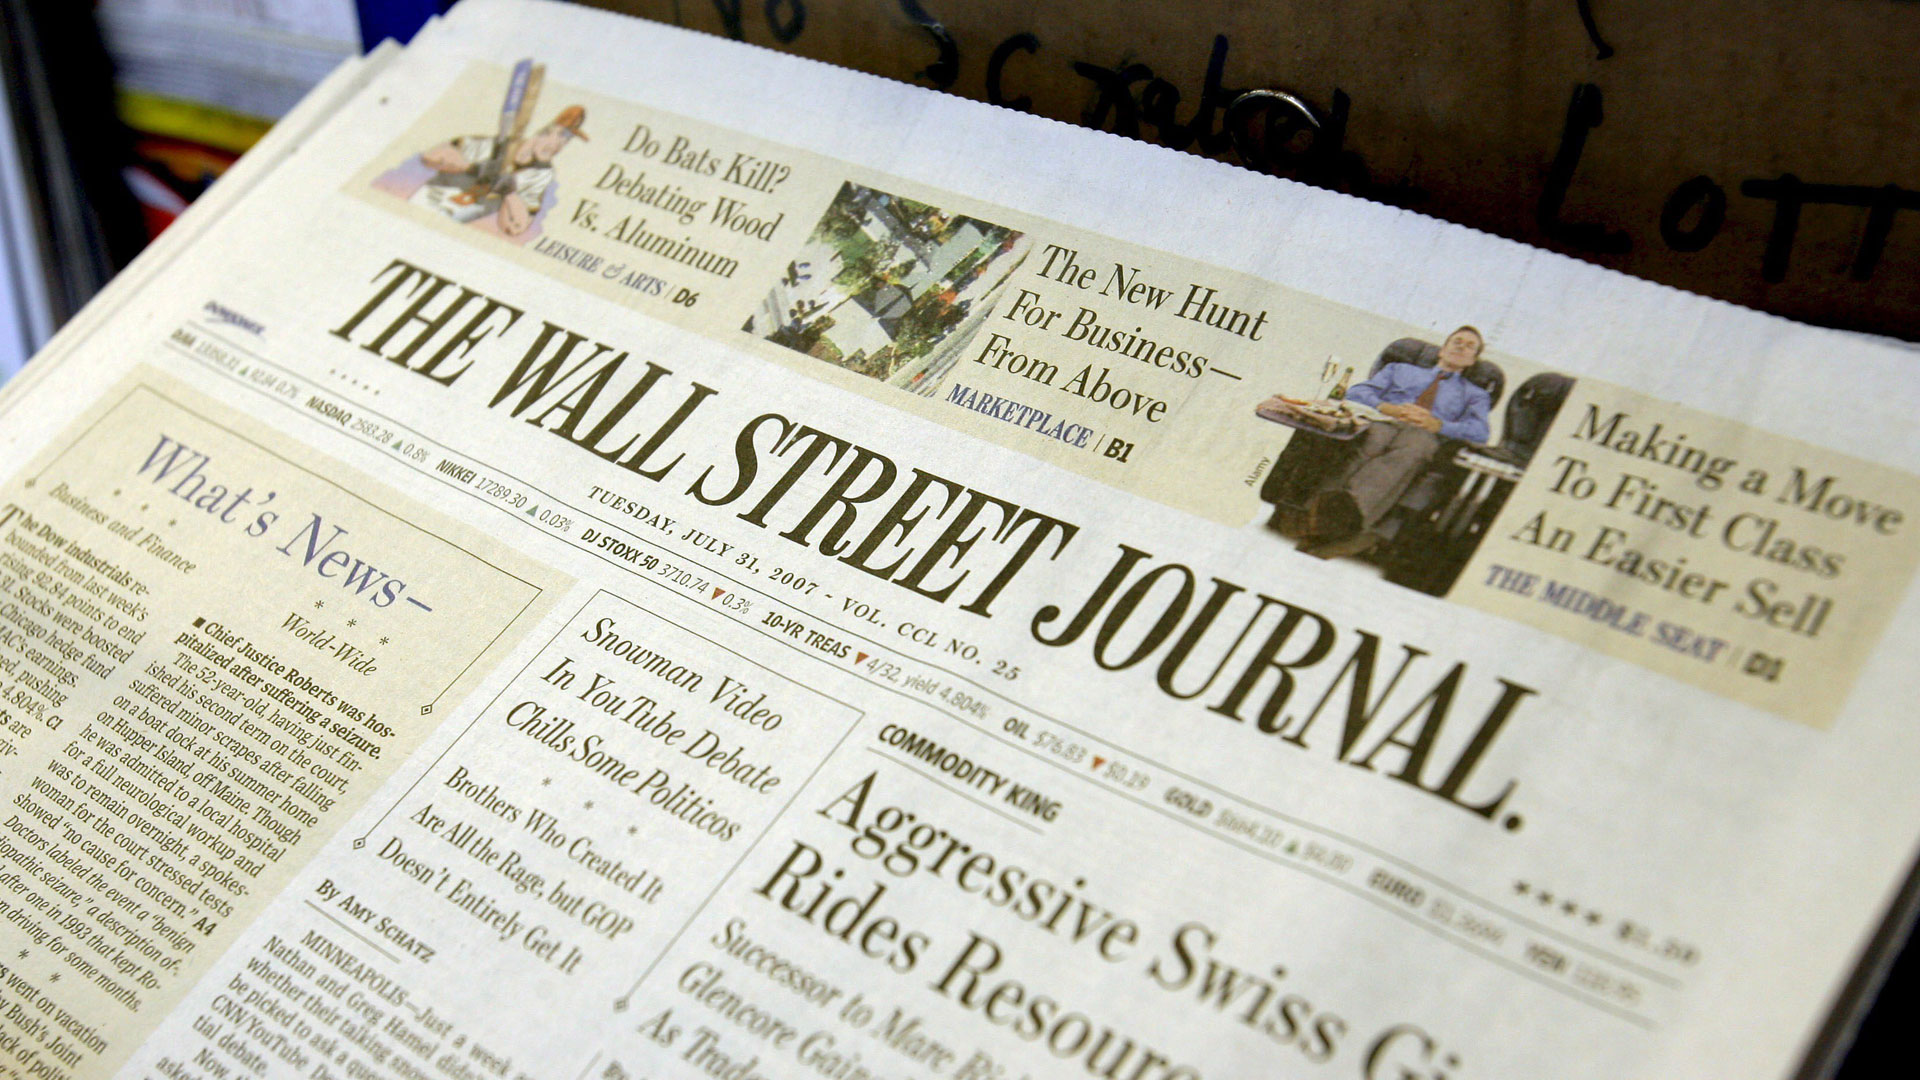 Wall Street Journal  | picture-alliance/ dpa